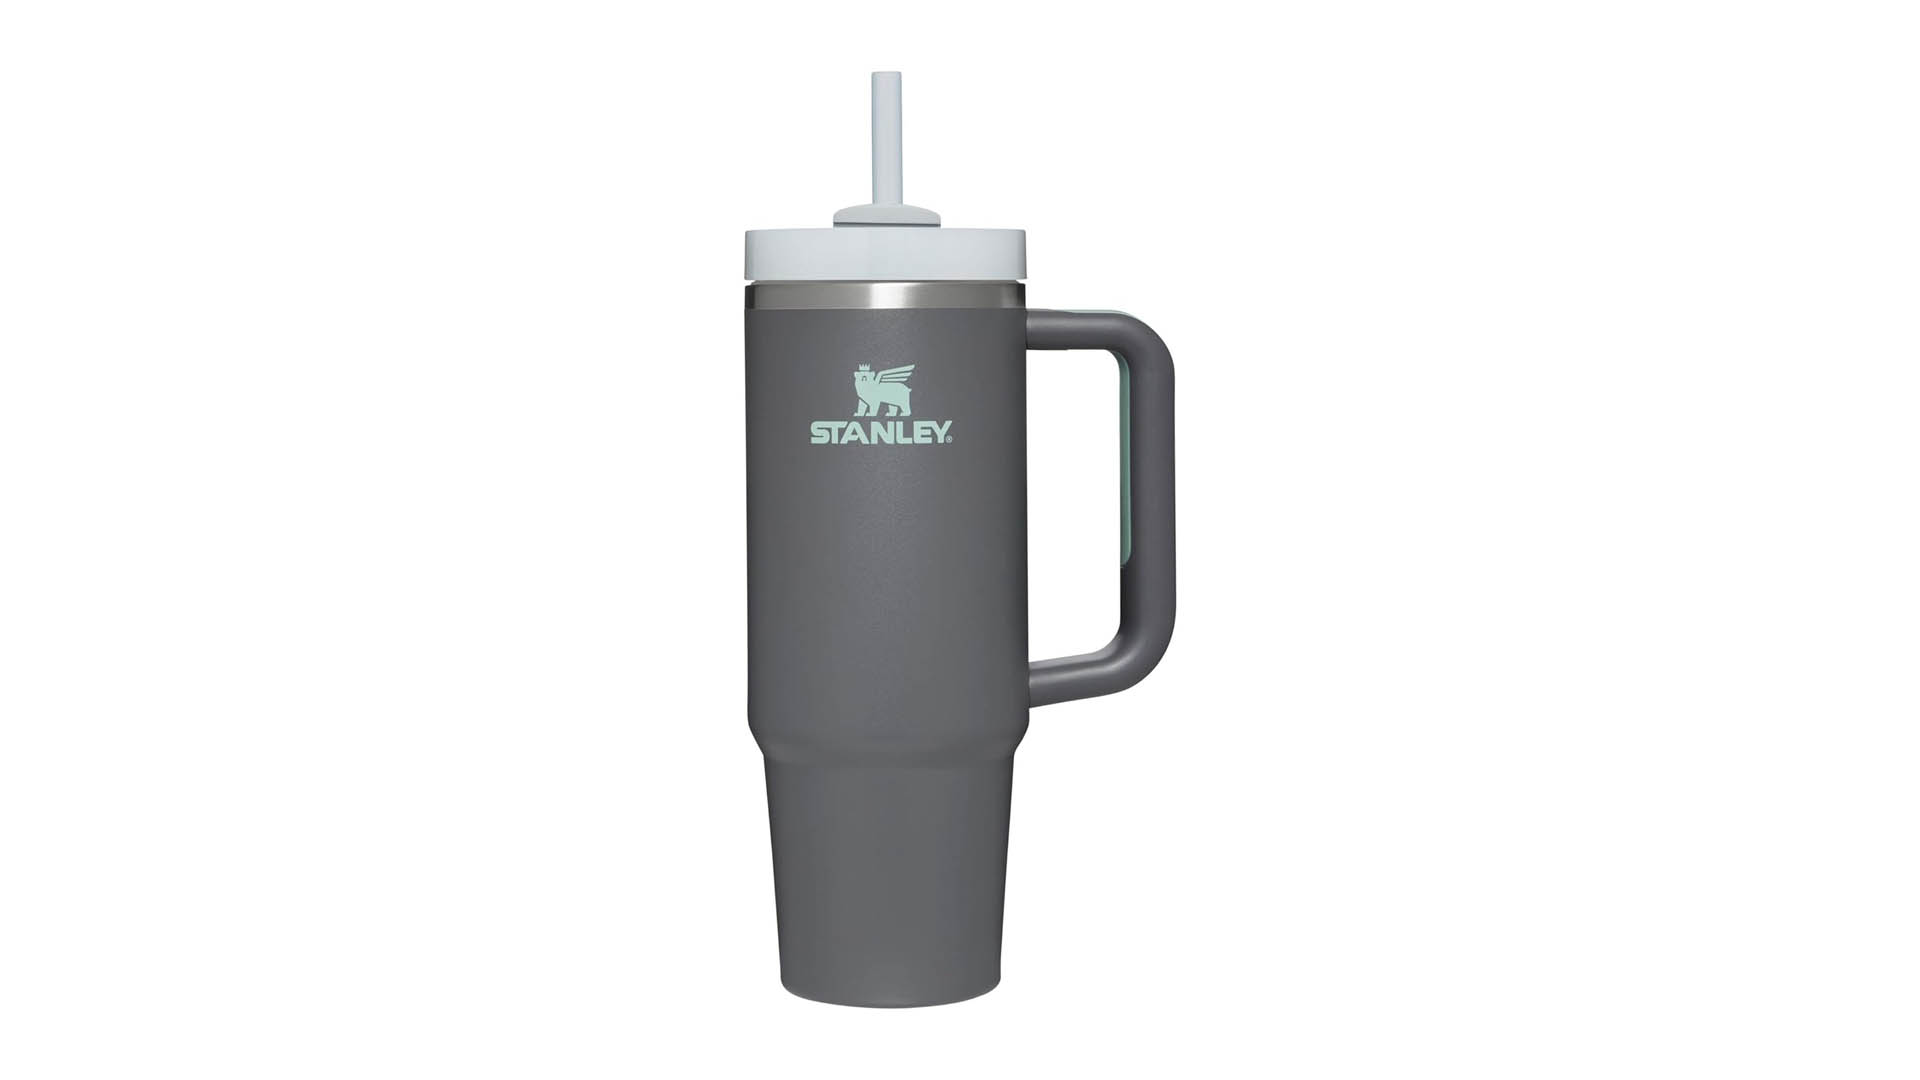 https://onecms-res.cloudinary.com/image/upload/v1700796852/mediacorp/8days/image/2023/11/24/01_stanley_quencher_h2.0_flowstate_stainless_steel_vacuum_insulated_tumbler.jpg